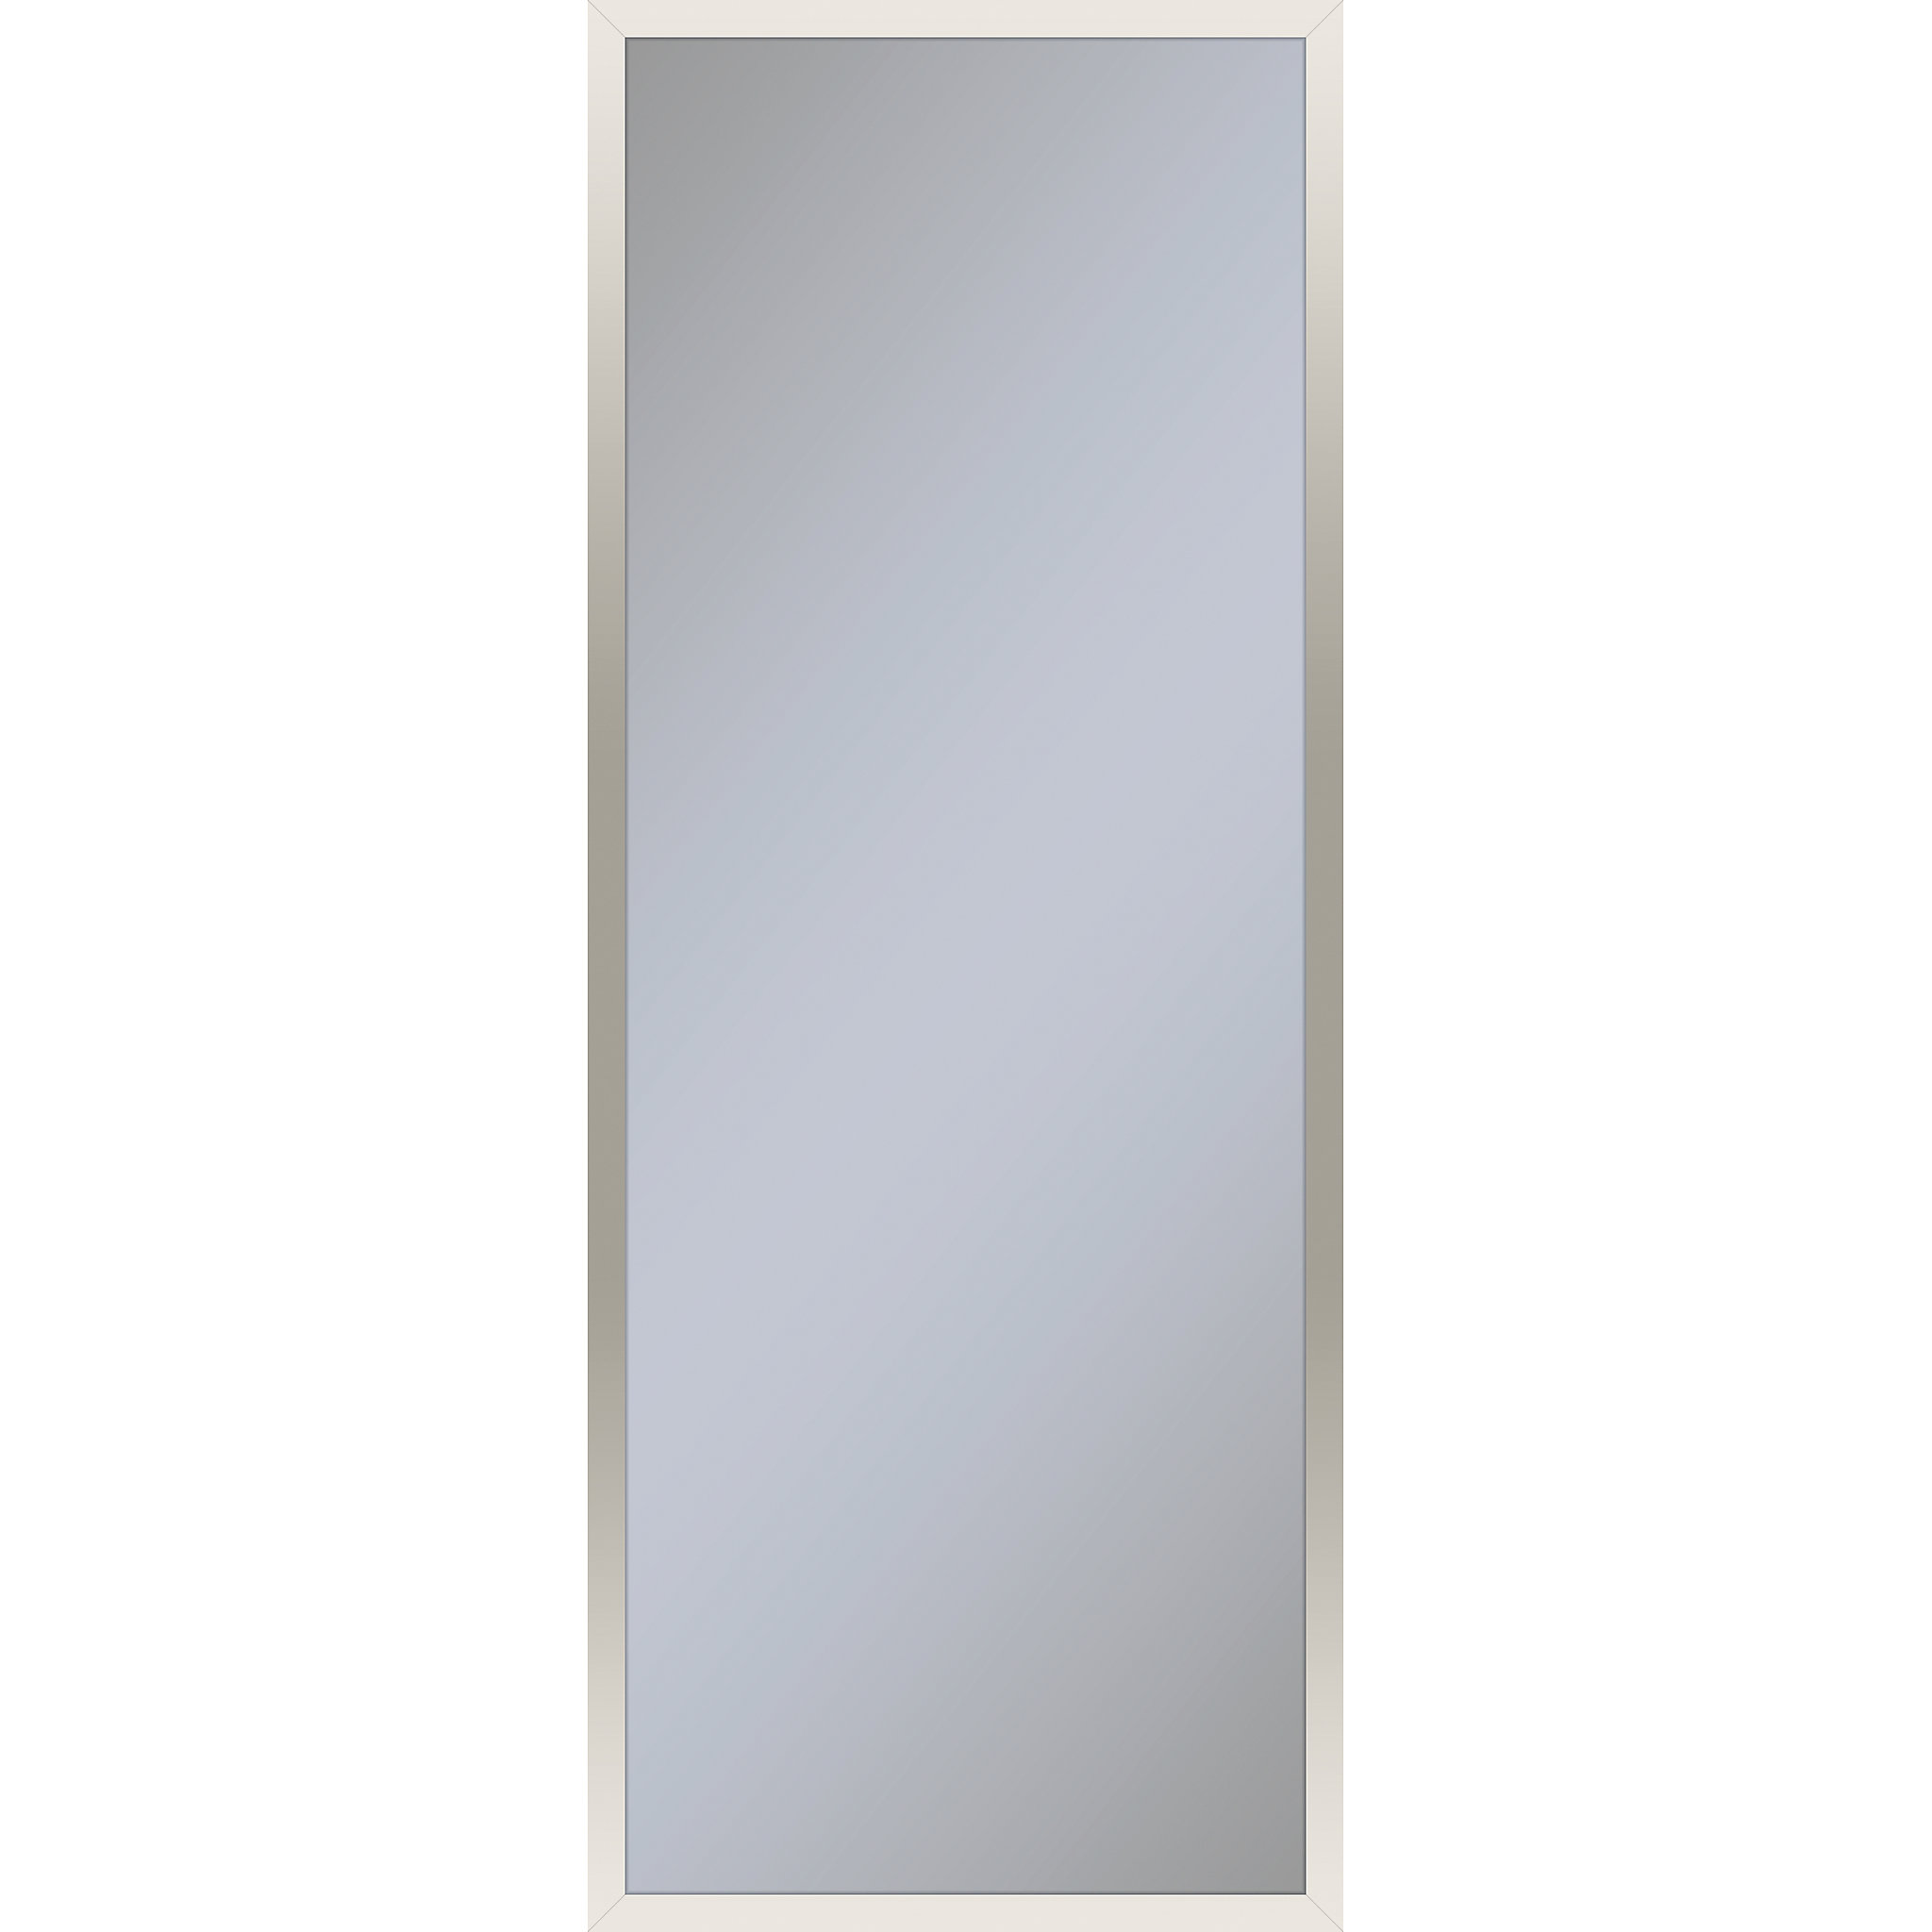 Robern PC1640D6TNN77 Profiles Framed Cabinet, 16" x 40" x 6", Polished Nickel, Non-Electric, Reversible Hinge